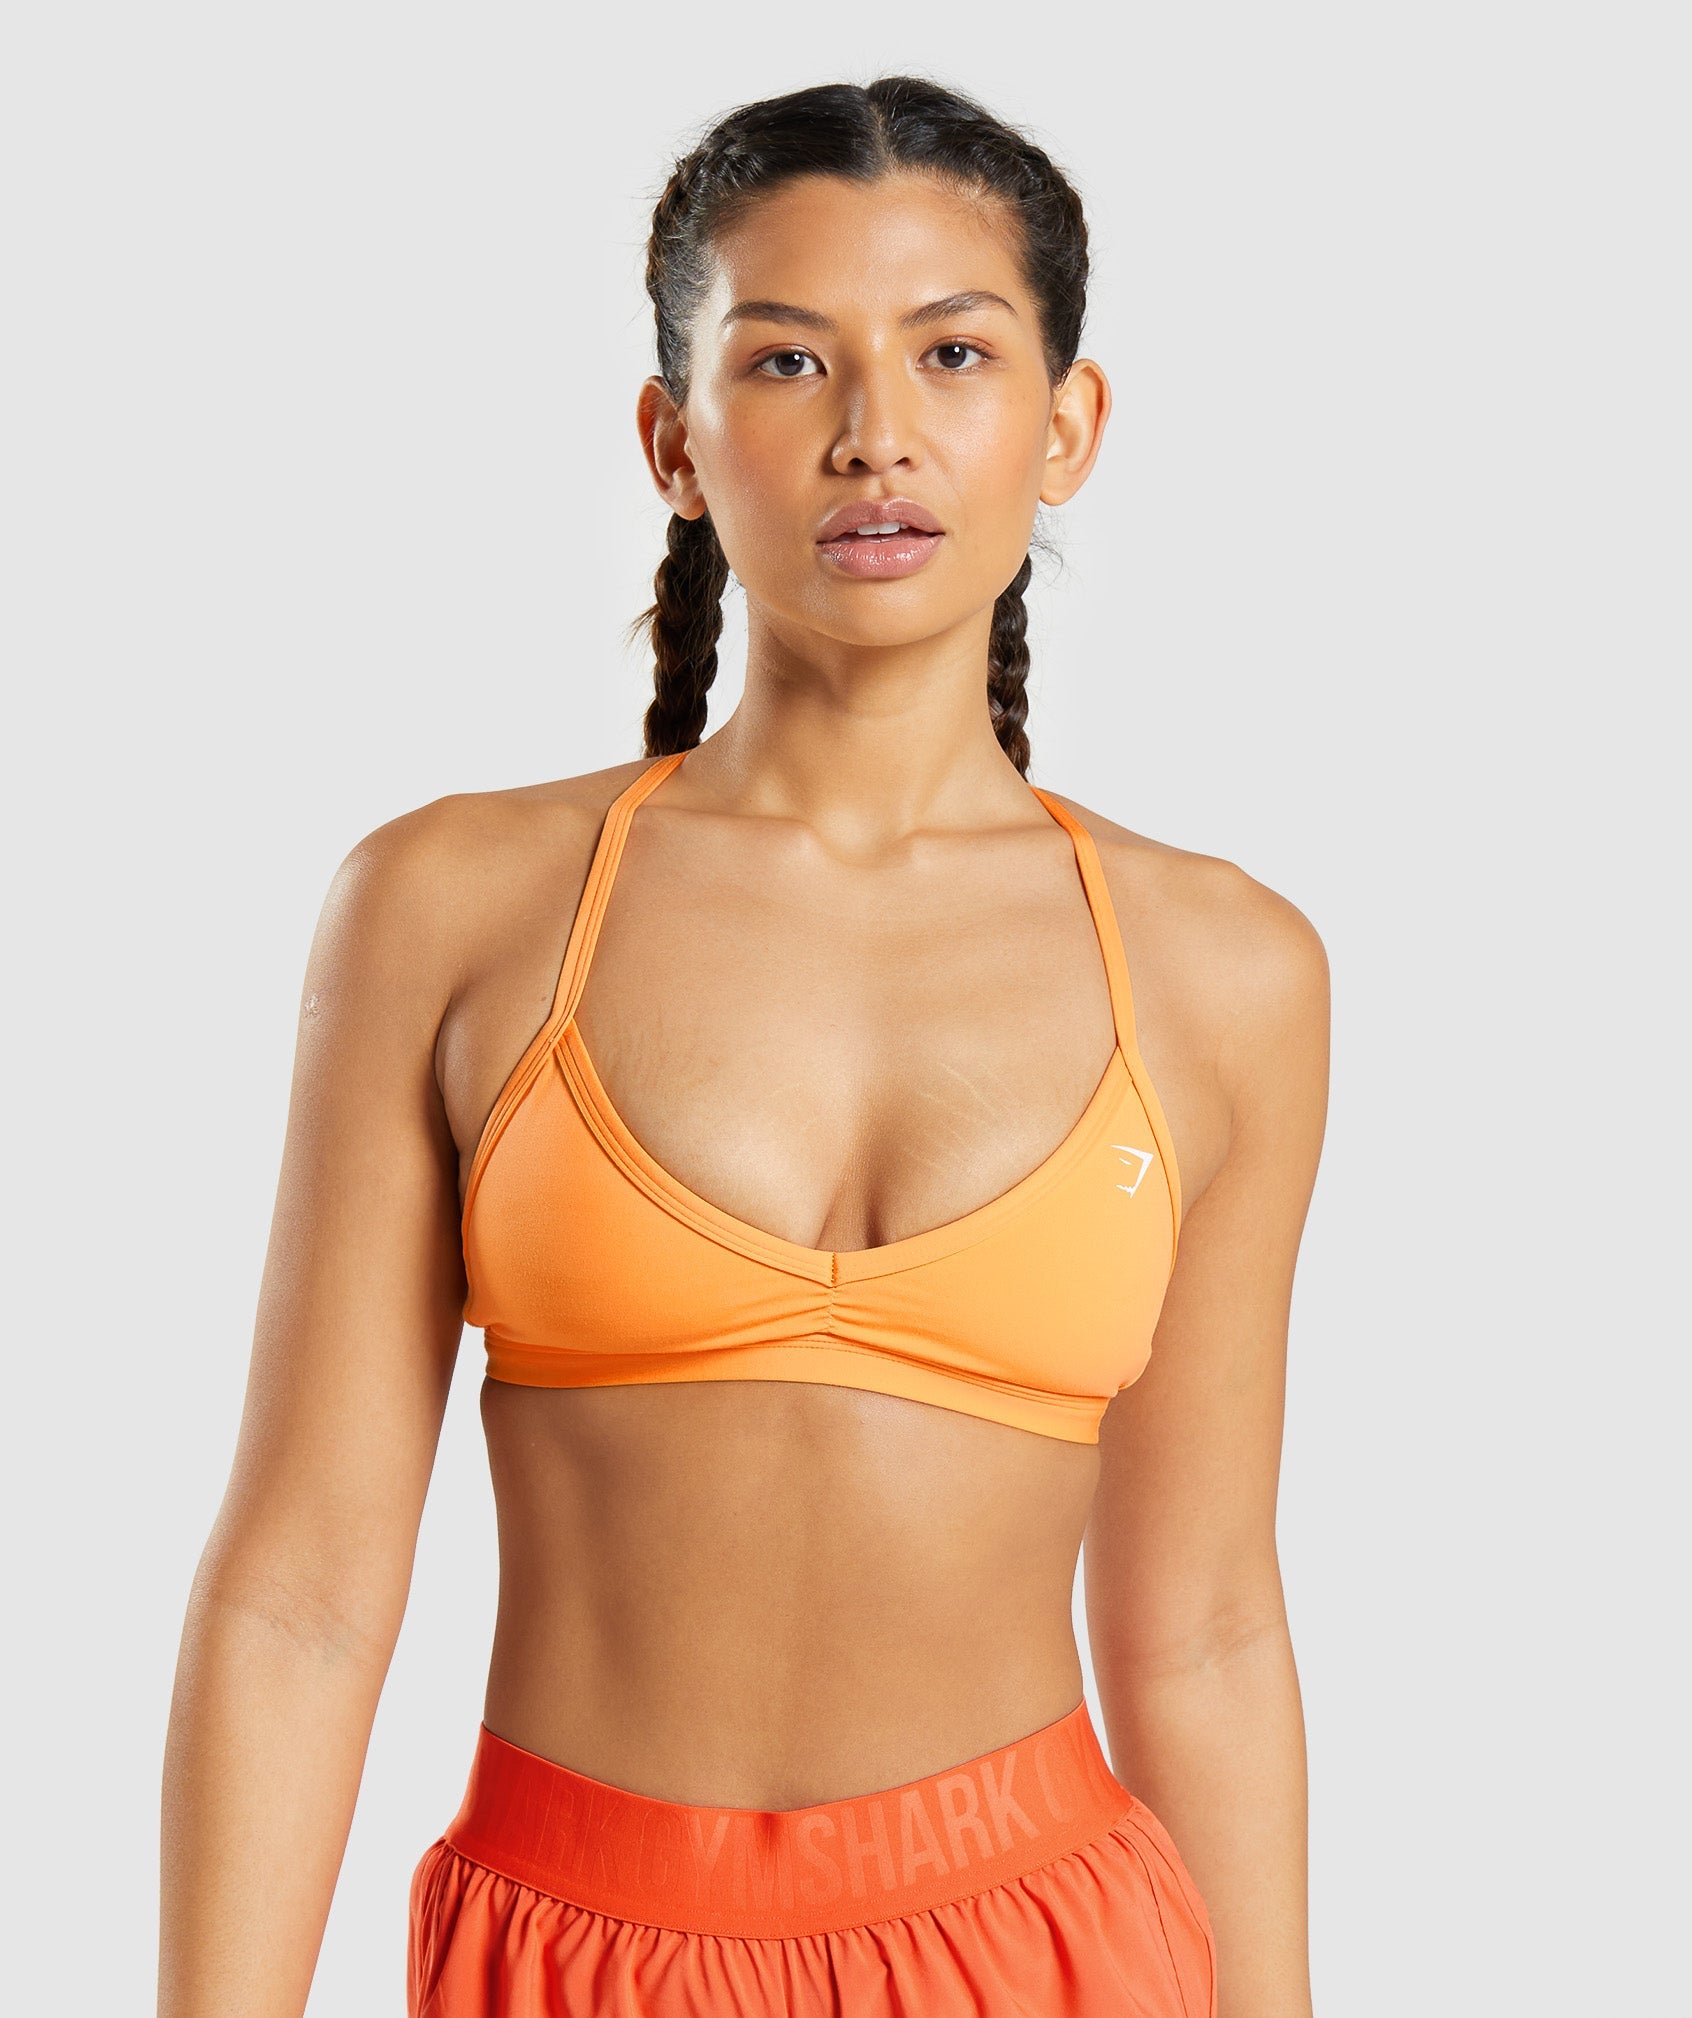 Gymshark High Support Sports Bra size Small Apricot Orange Racer back